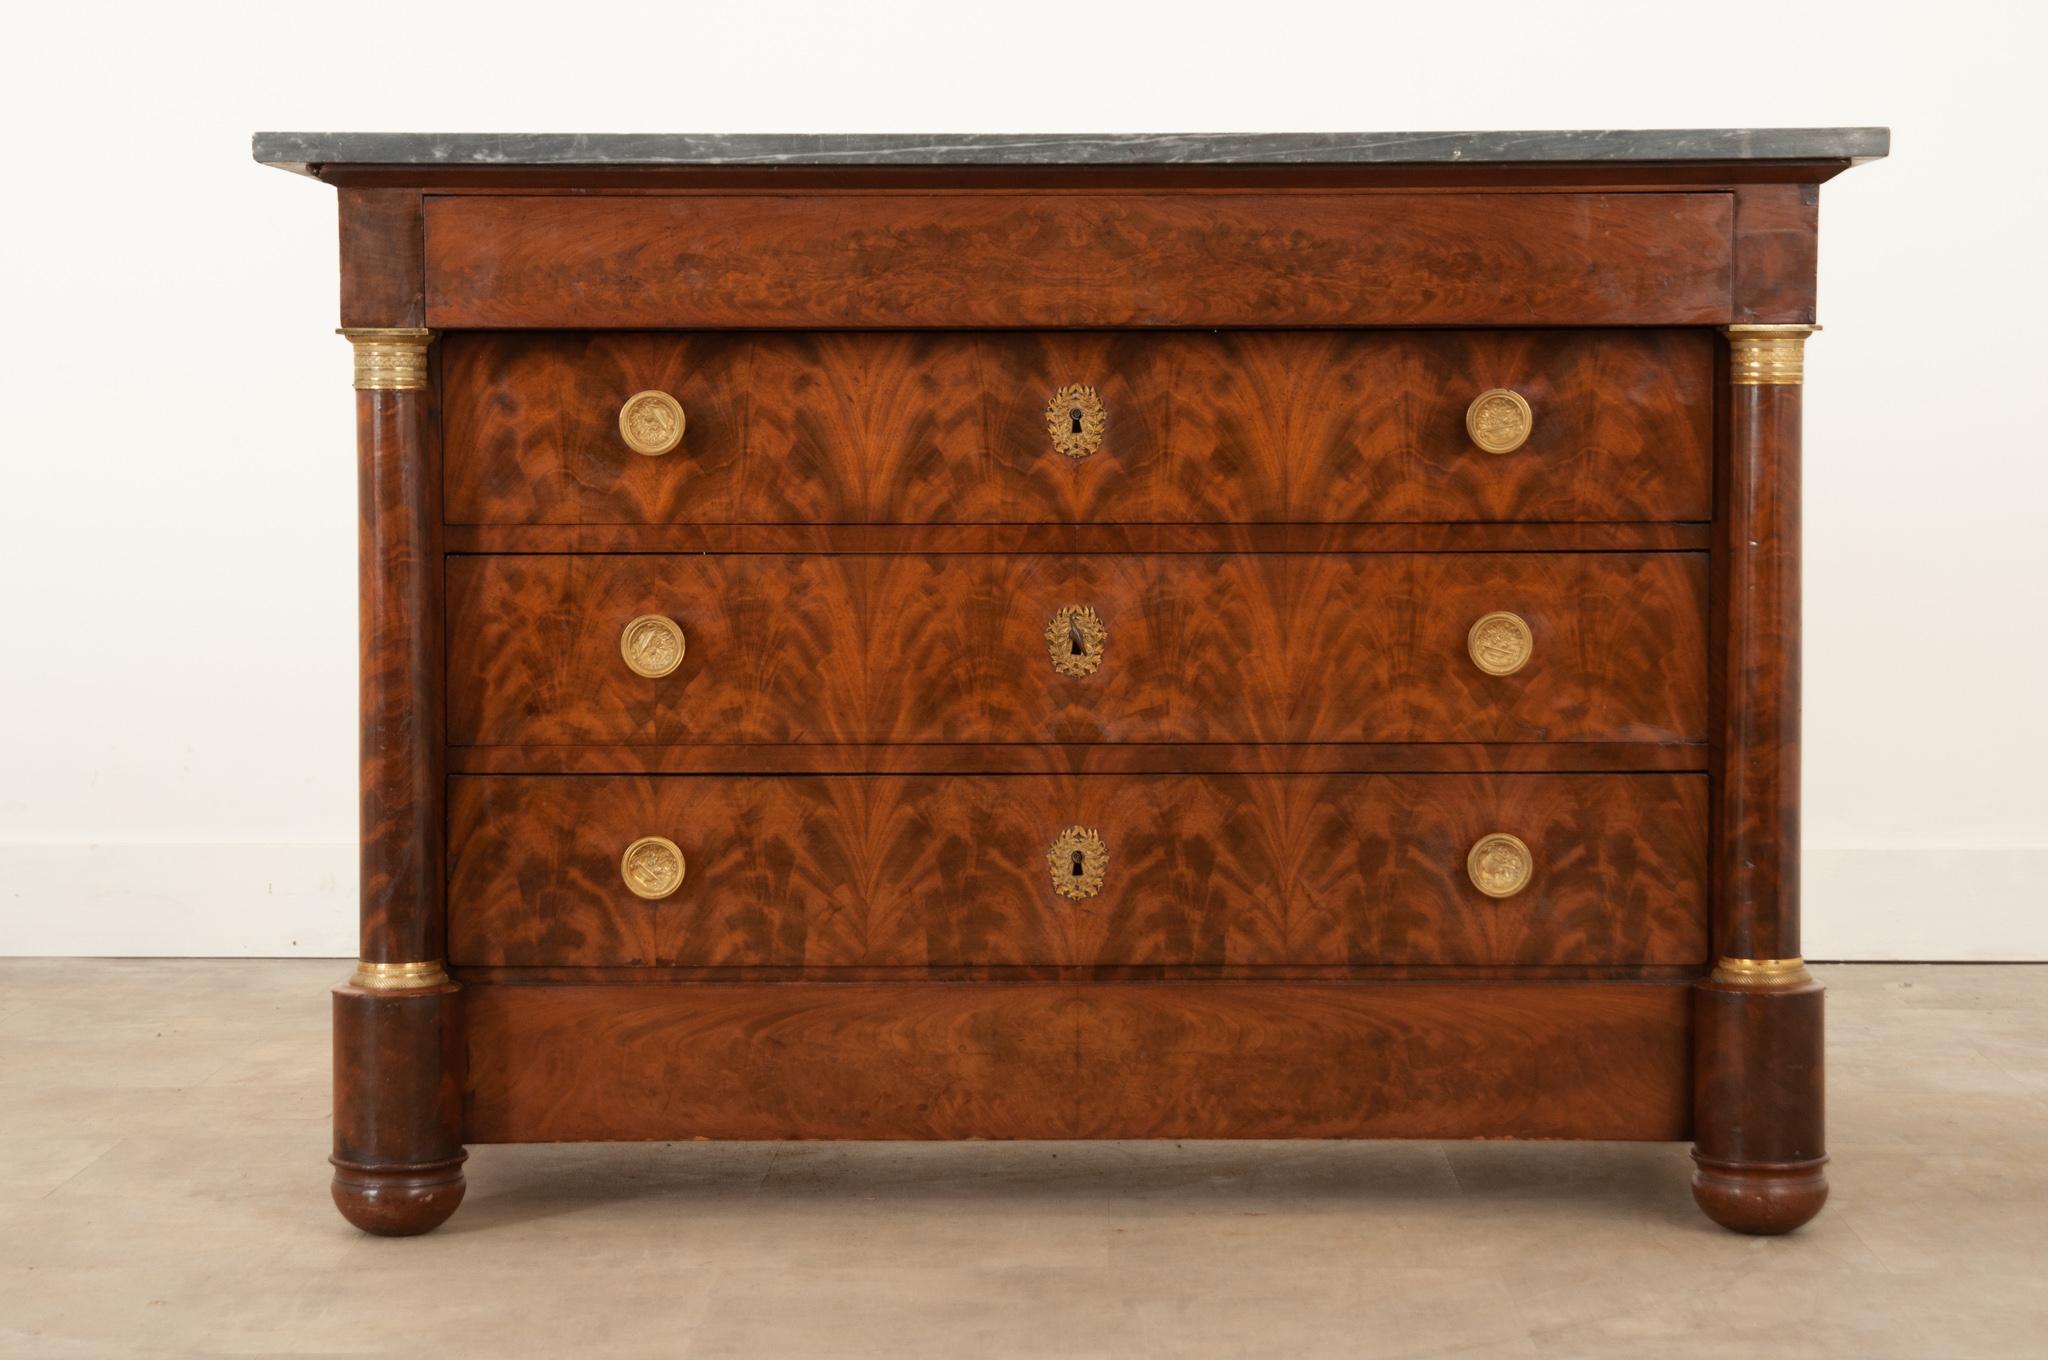 This French 19th century bookmatched mahogany commode is in wonderful antique condition. Its original charcoal and white marble top fits perfectly over the base. This commode houses four drawers for plenty of storage. The top drawer is hidden in the